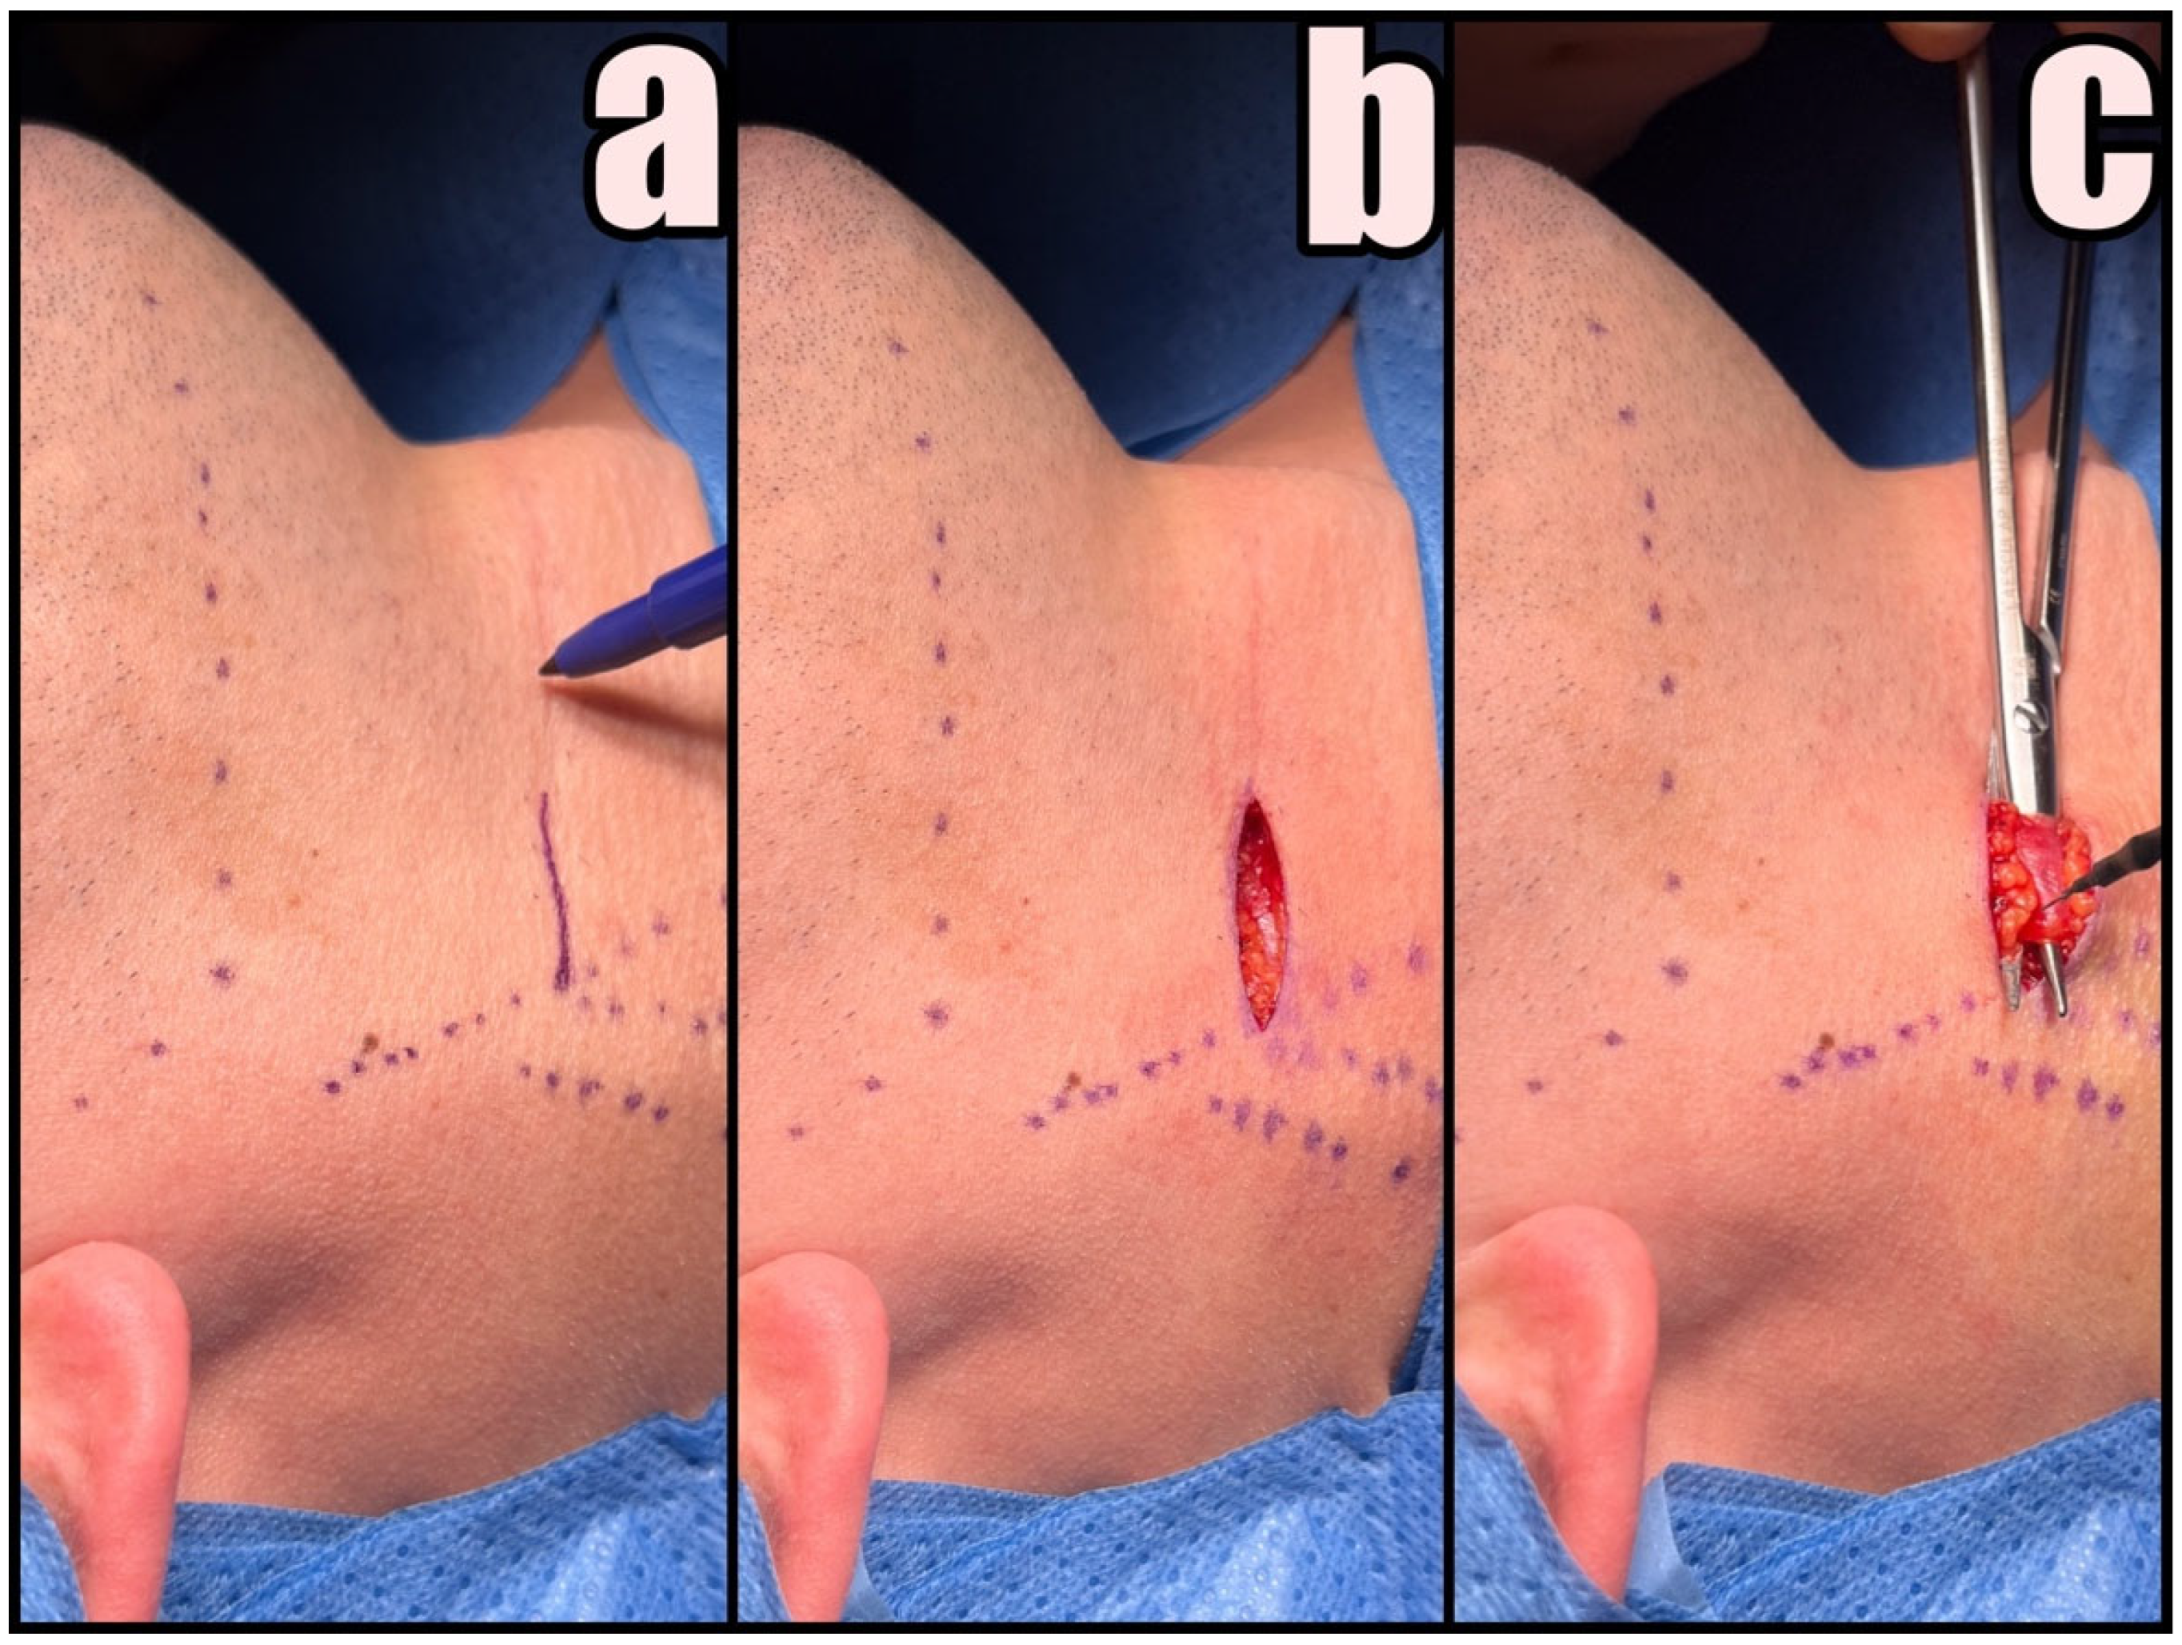 a, b, c. A. Marking of the incision containing the pilonidal cyst and 2